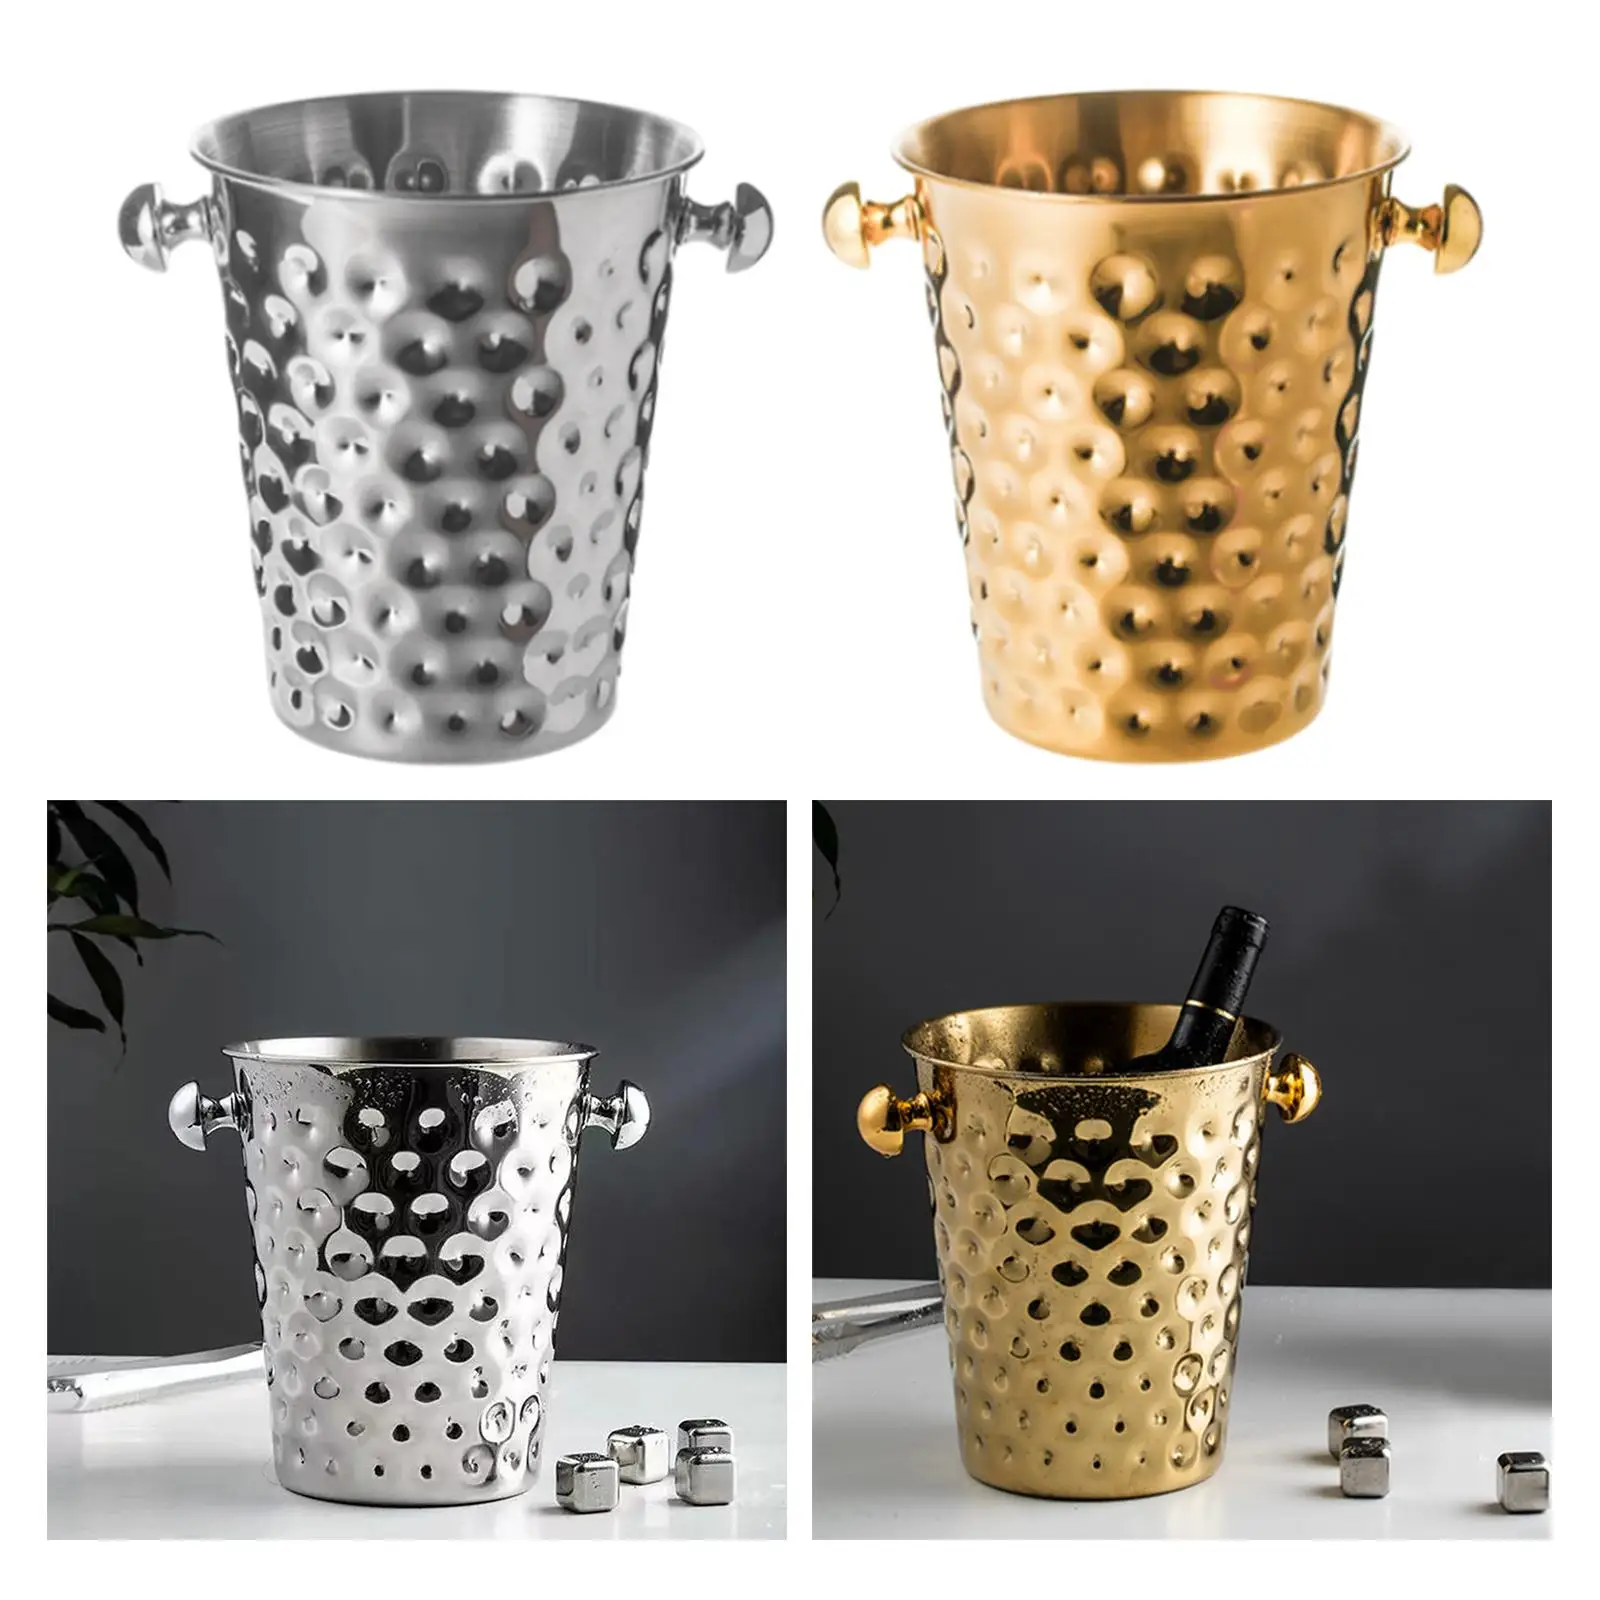 Cooler Bucket Drink Tub with Handle Beer Chiller Fashionable Ice Wine Barrel for Indoor Outdoor Party Barbecue Bar Wine